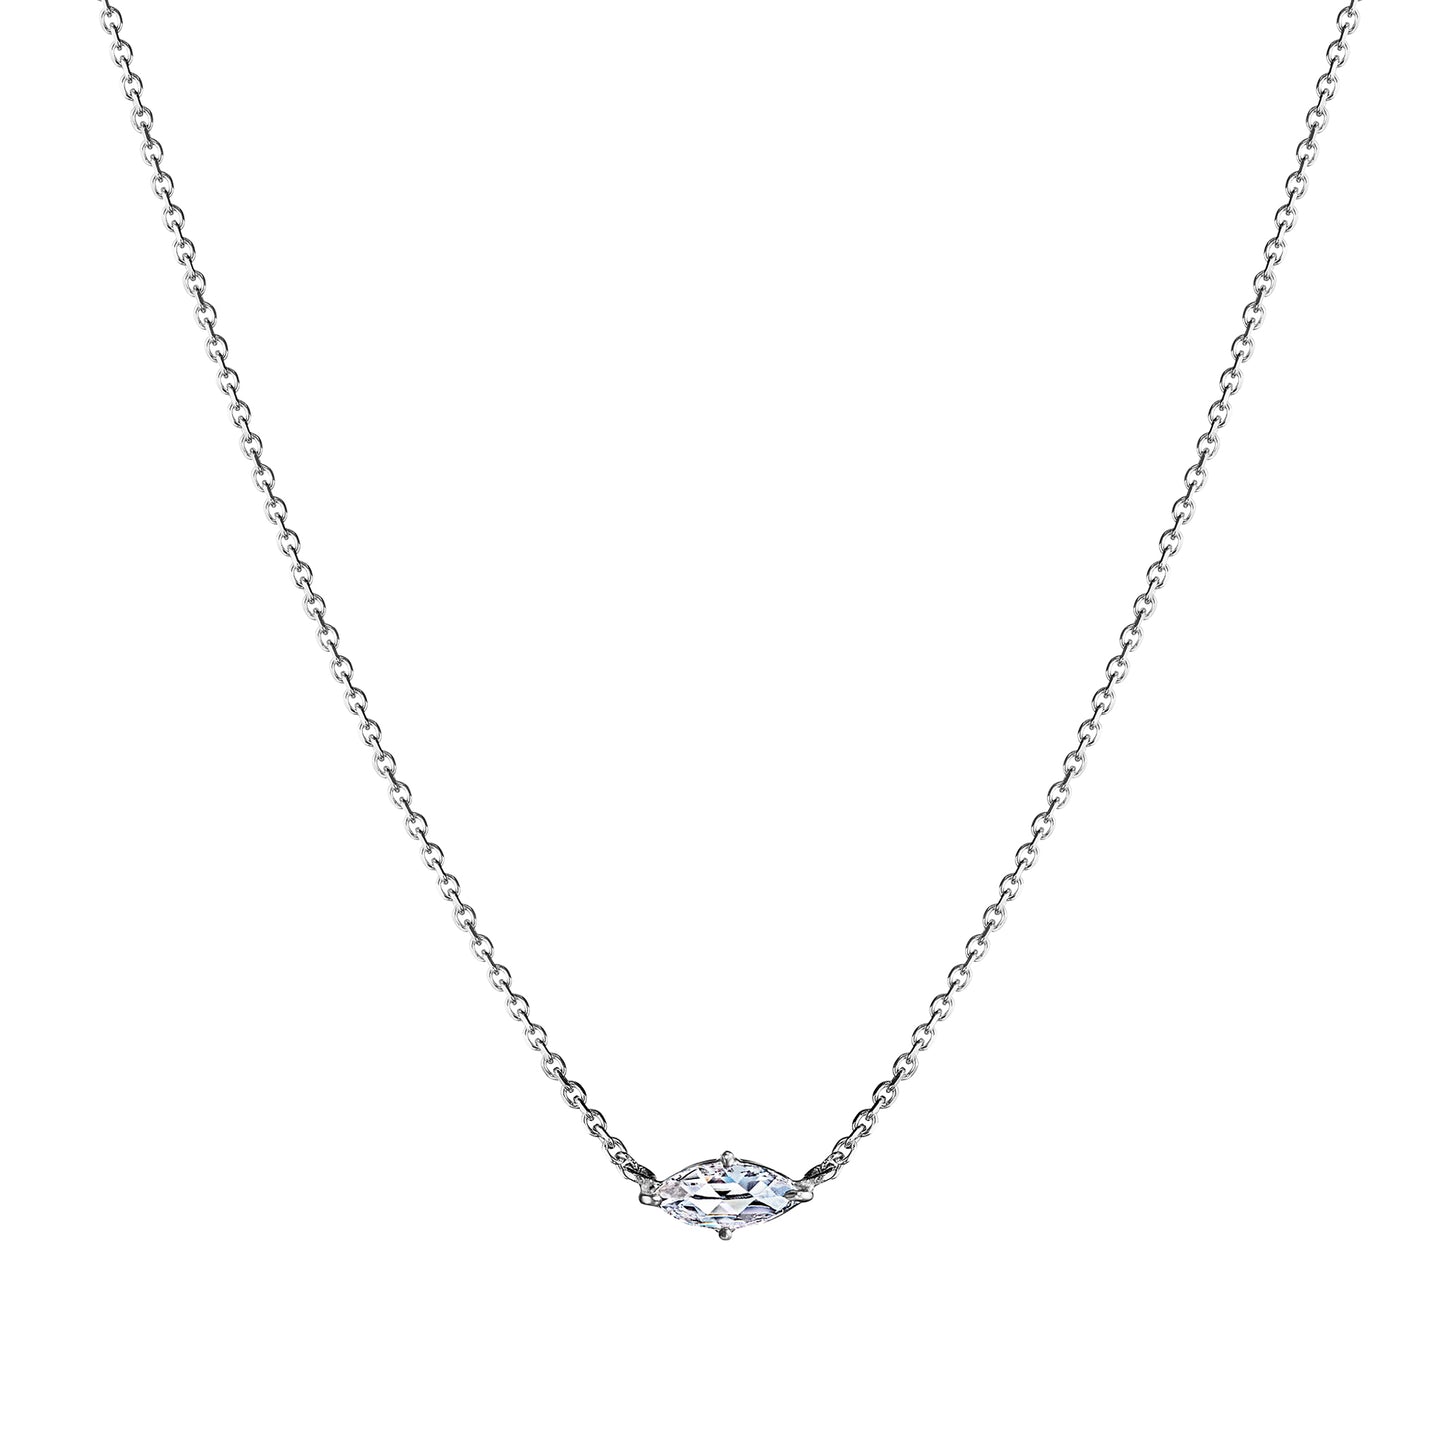 Mimi So Classic Rose Cut Marquise Diamond Solitaire Necklace 18k White Gold